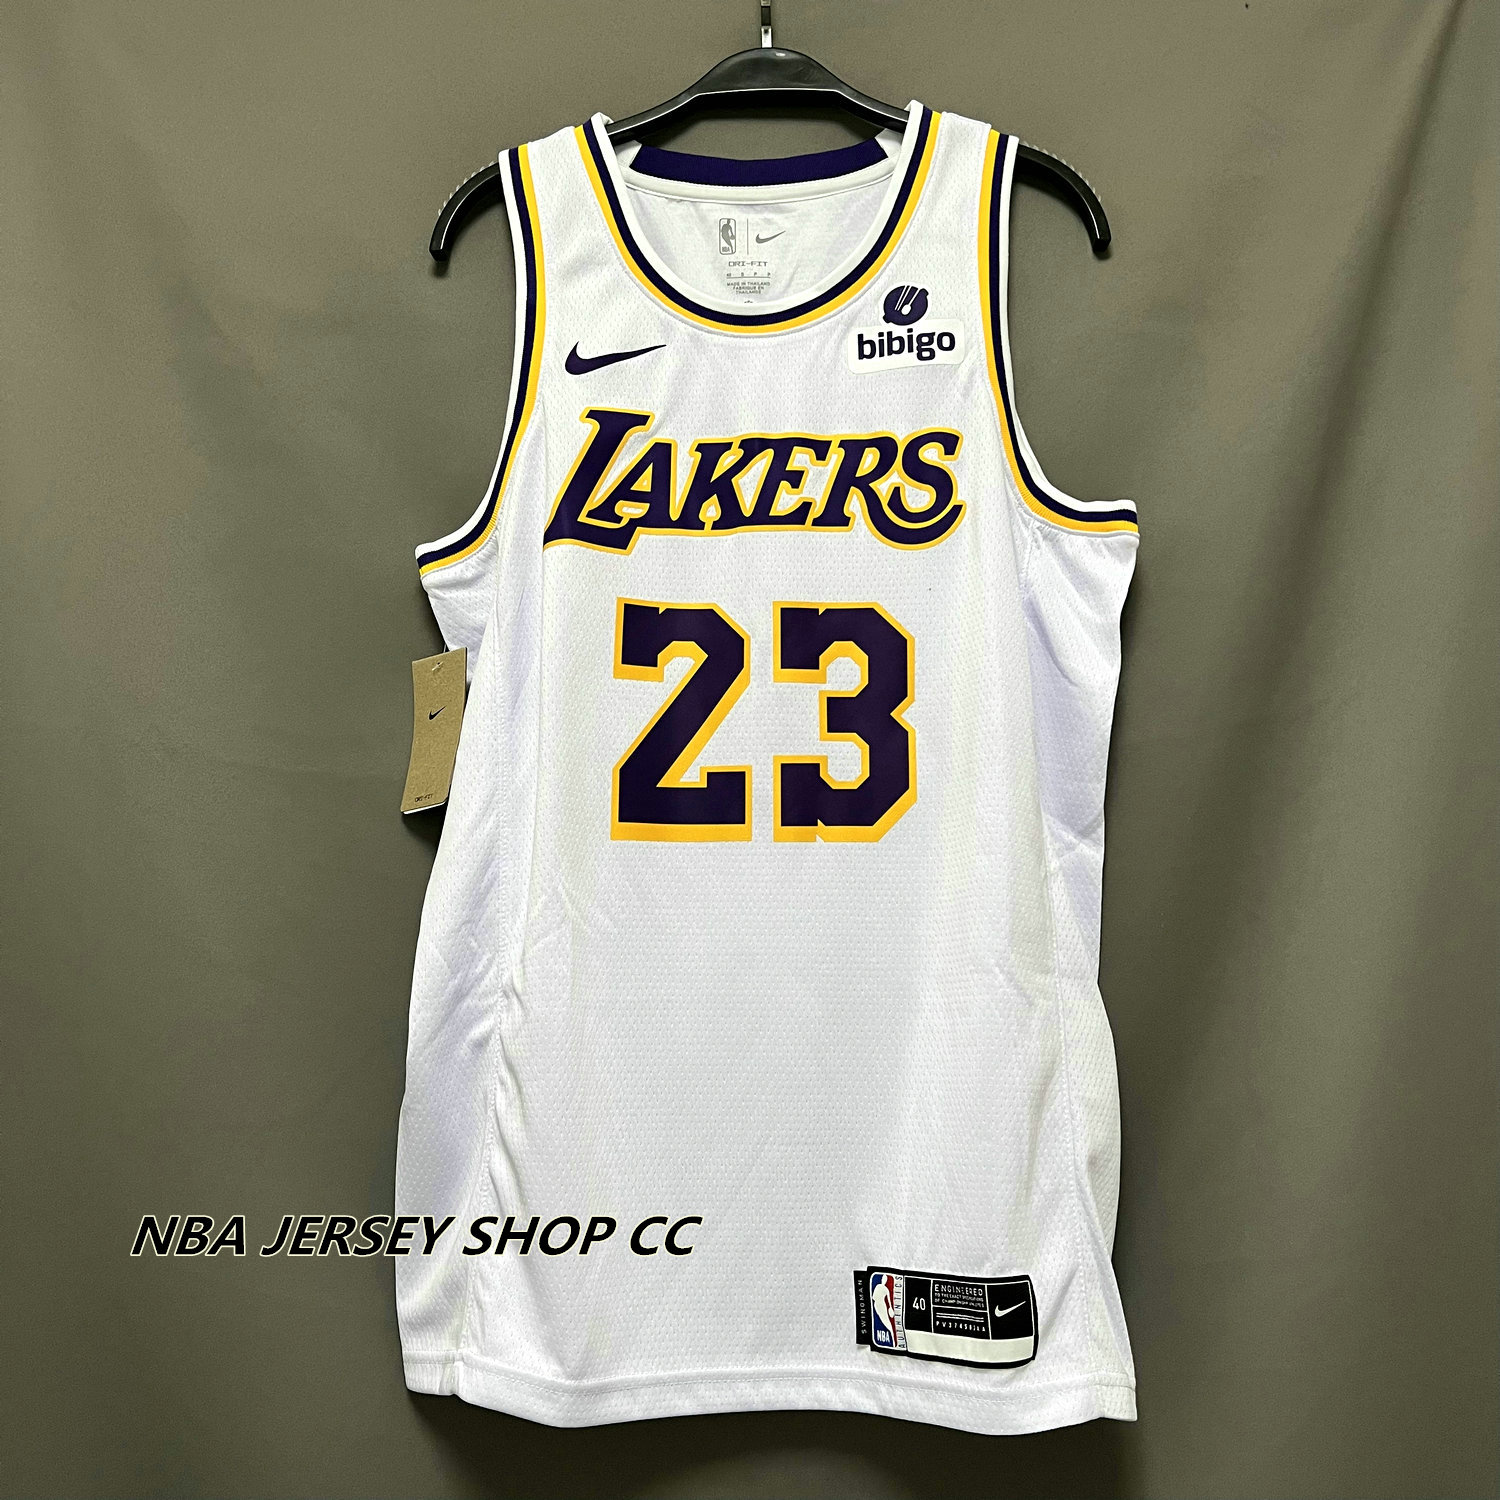 Shop High Quality Nba Lakers Basketball 23 with great discounts